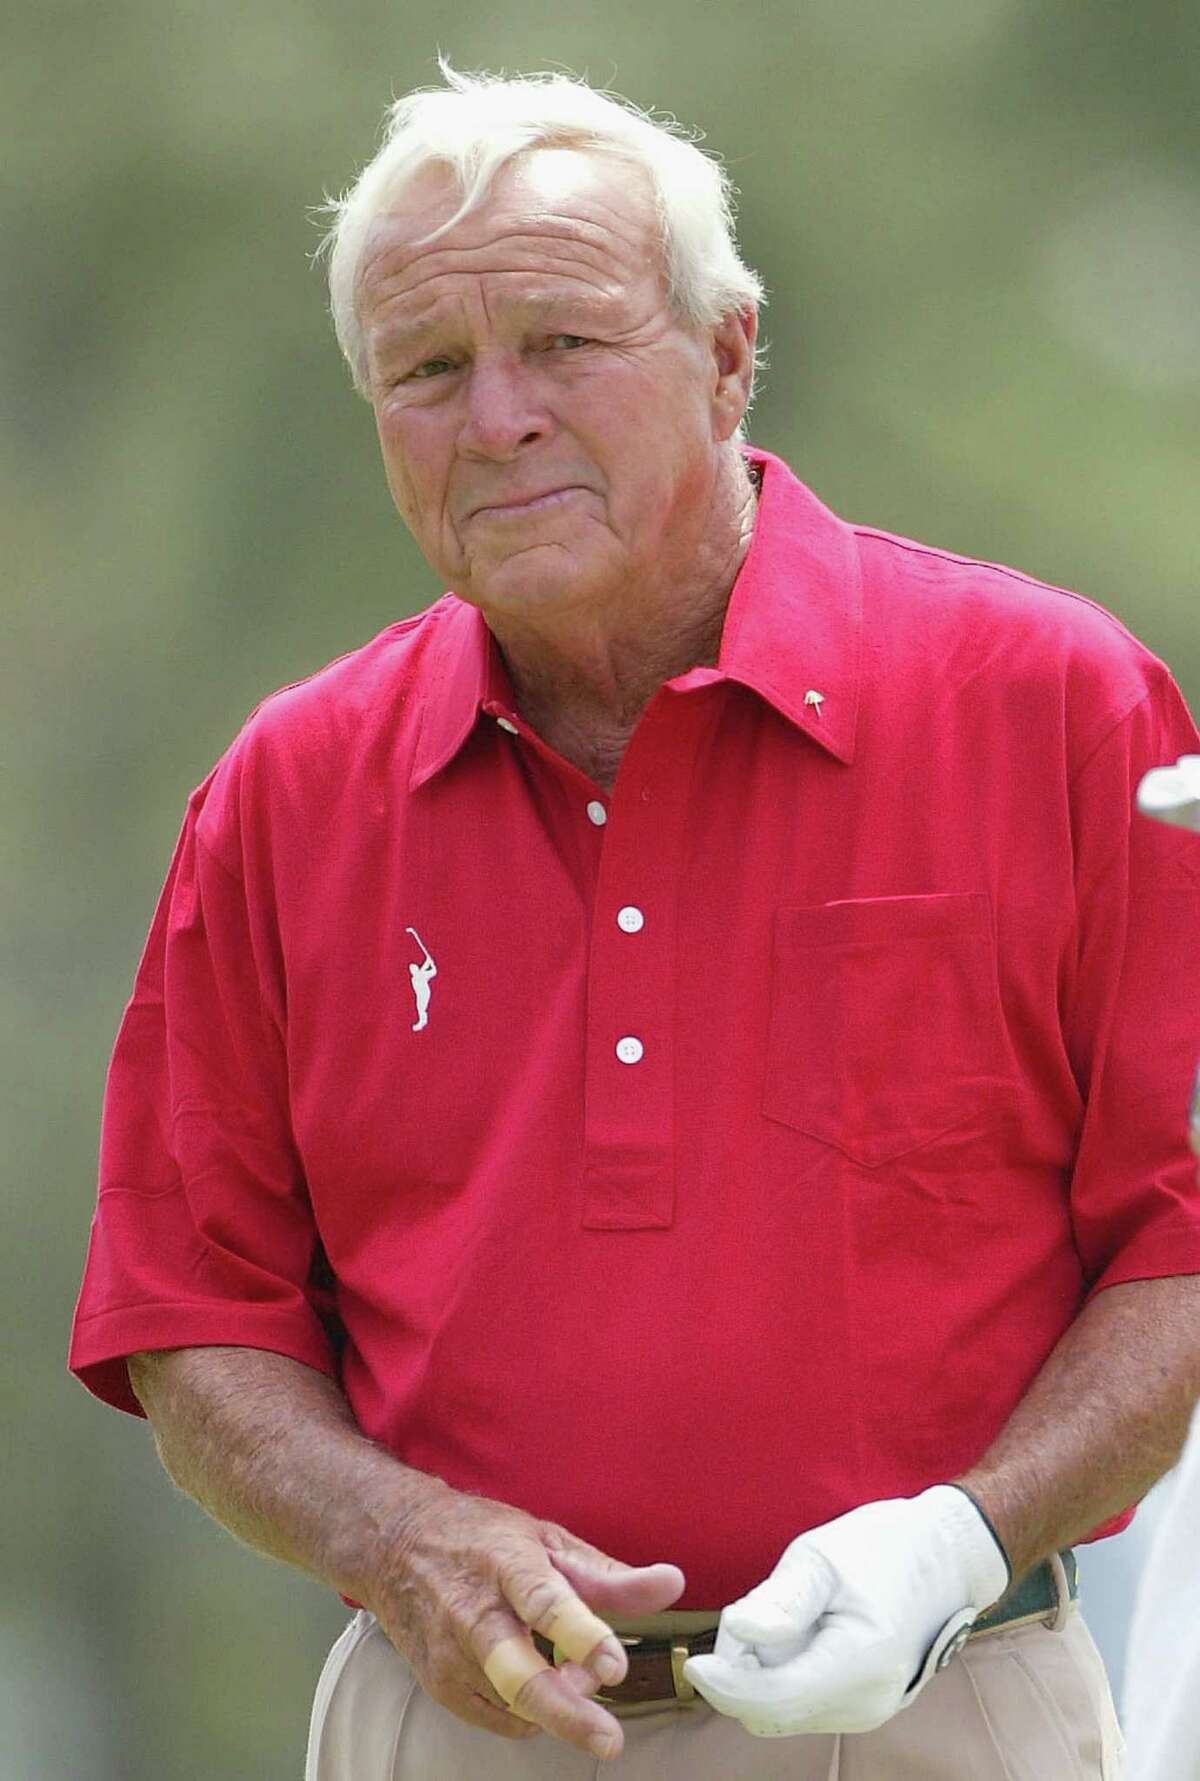 Guest commentary: Palmer brought joy to golf